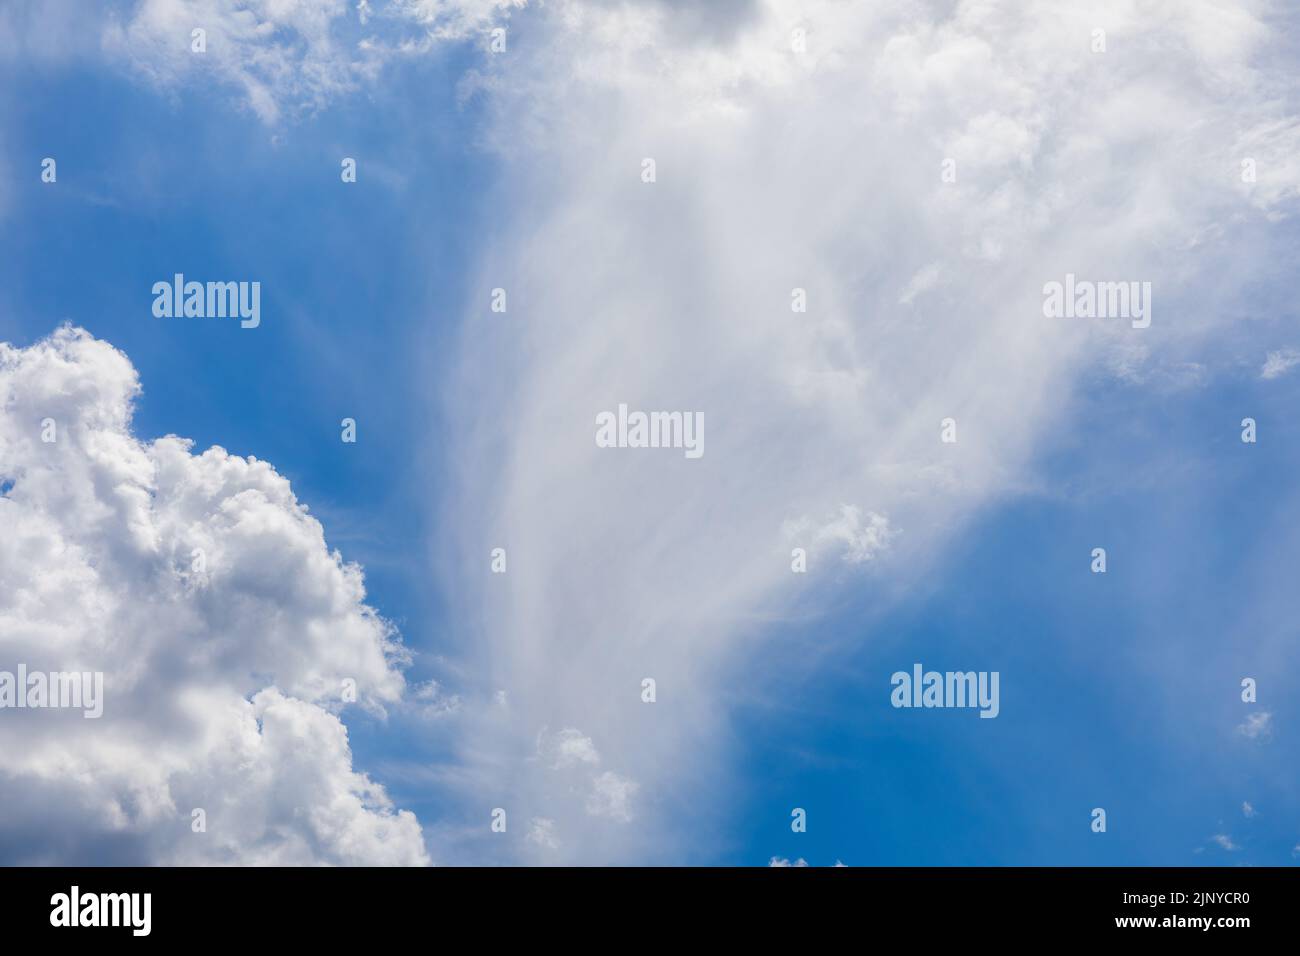 Cloudscape with beautiful white fluffy clouds against a blue sky. Stock Photo